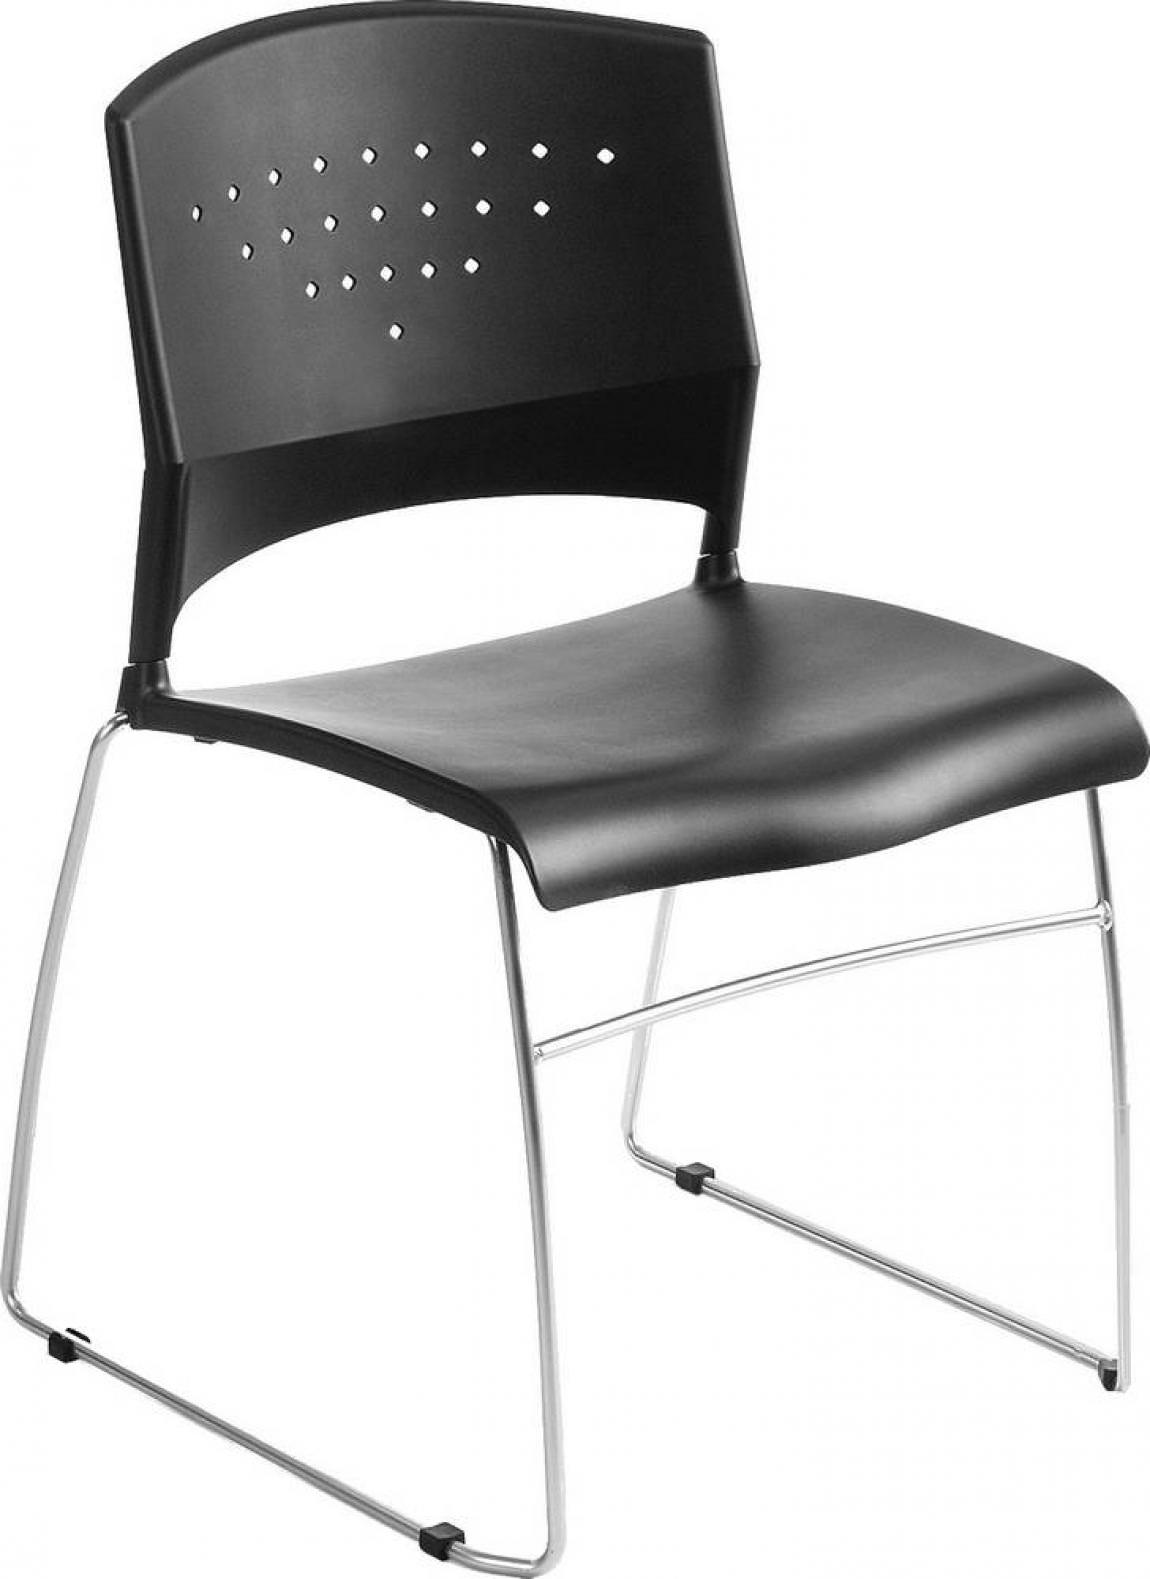 Black Stackable Chair with Chrome Frame